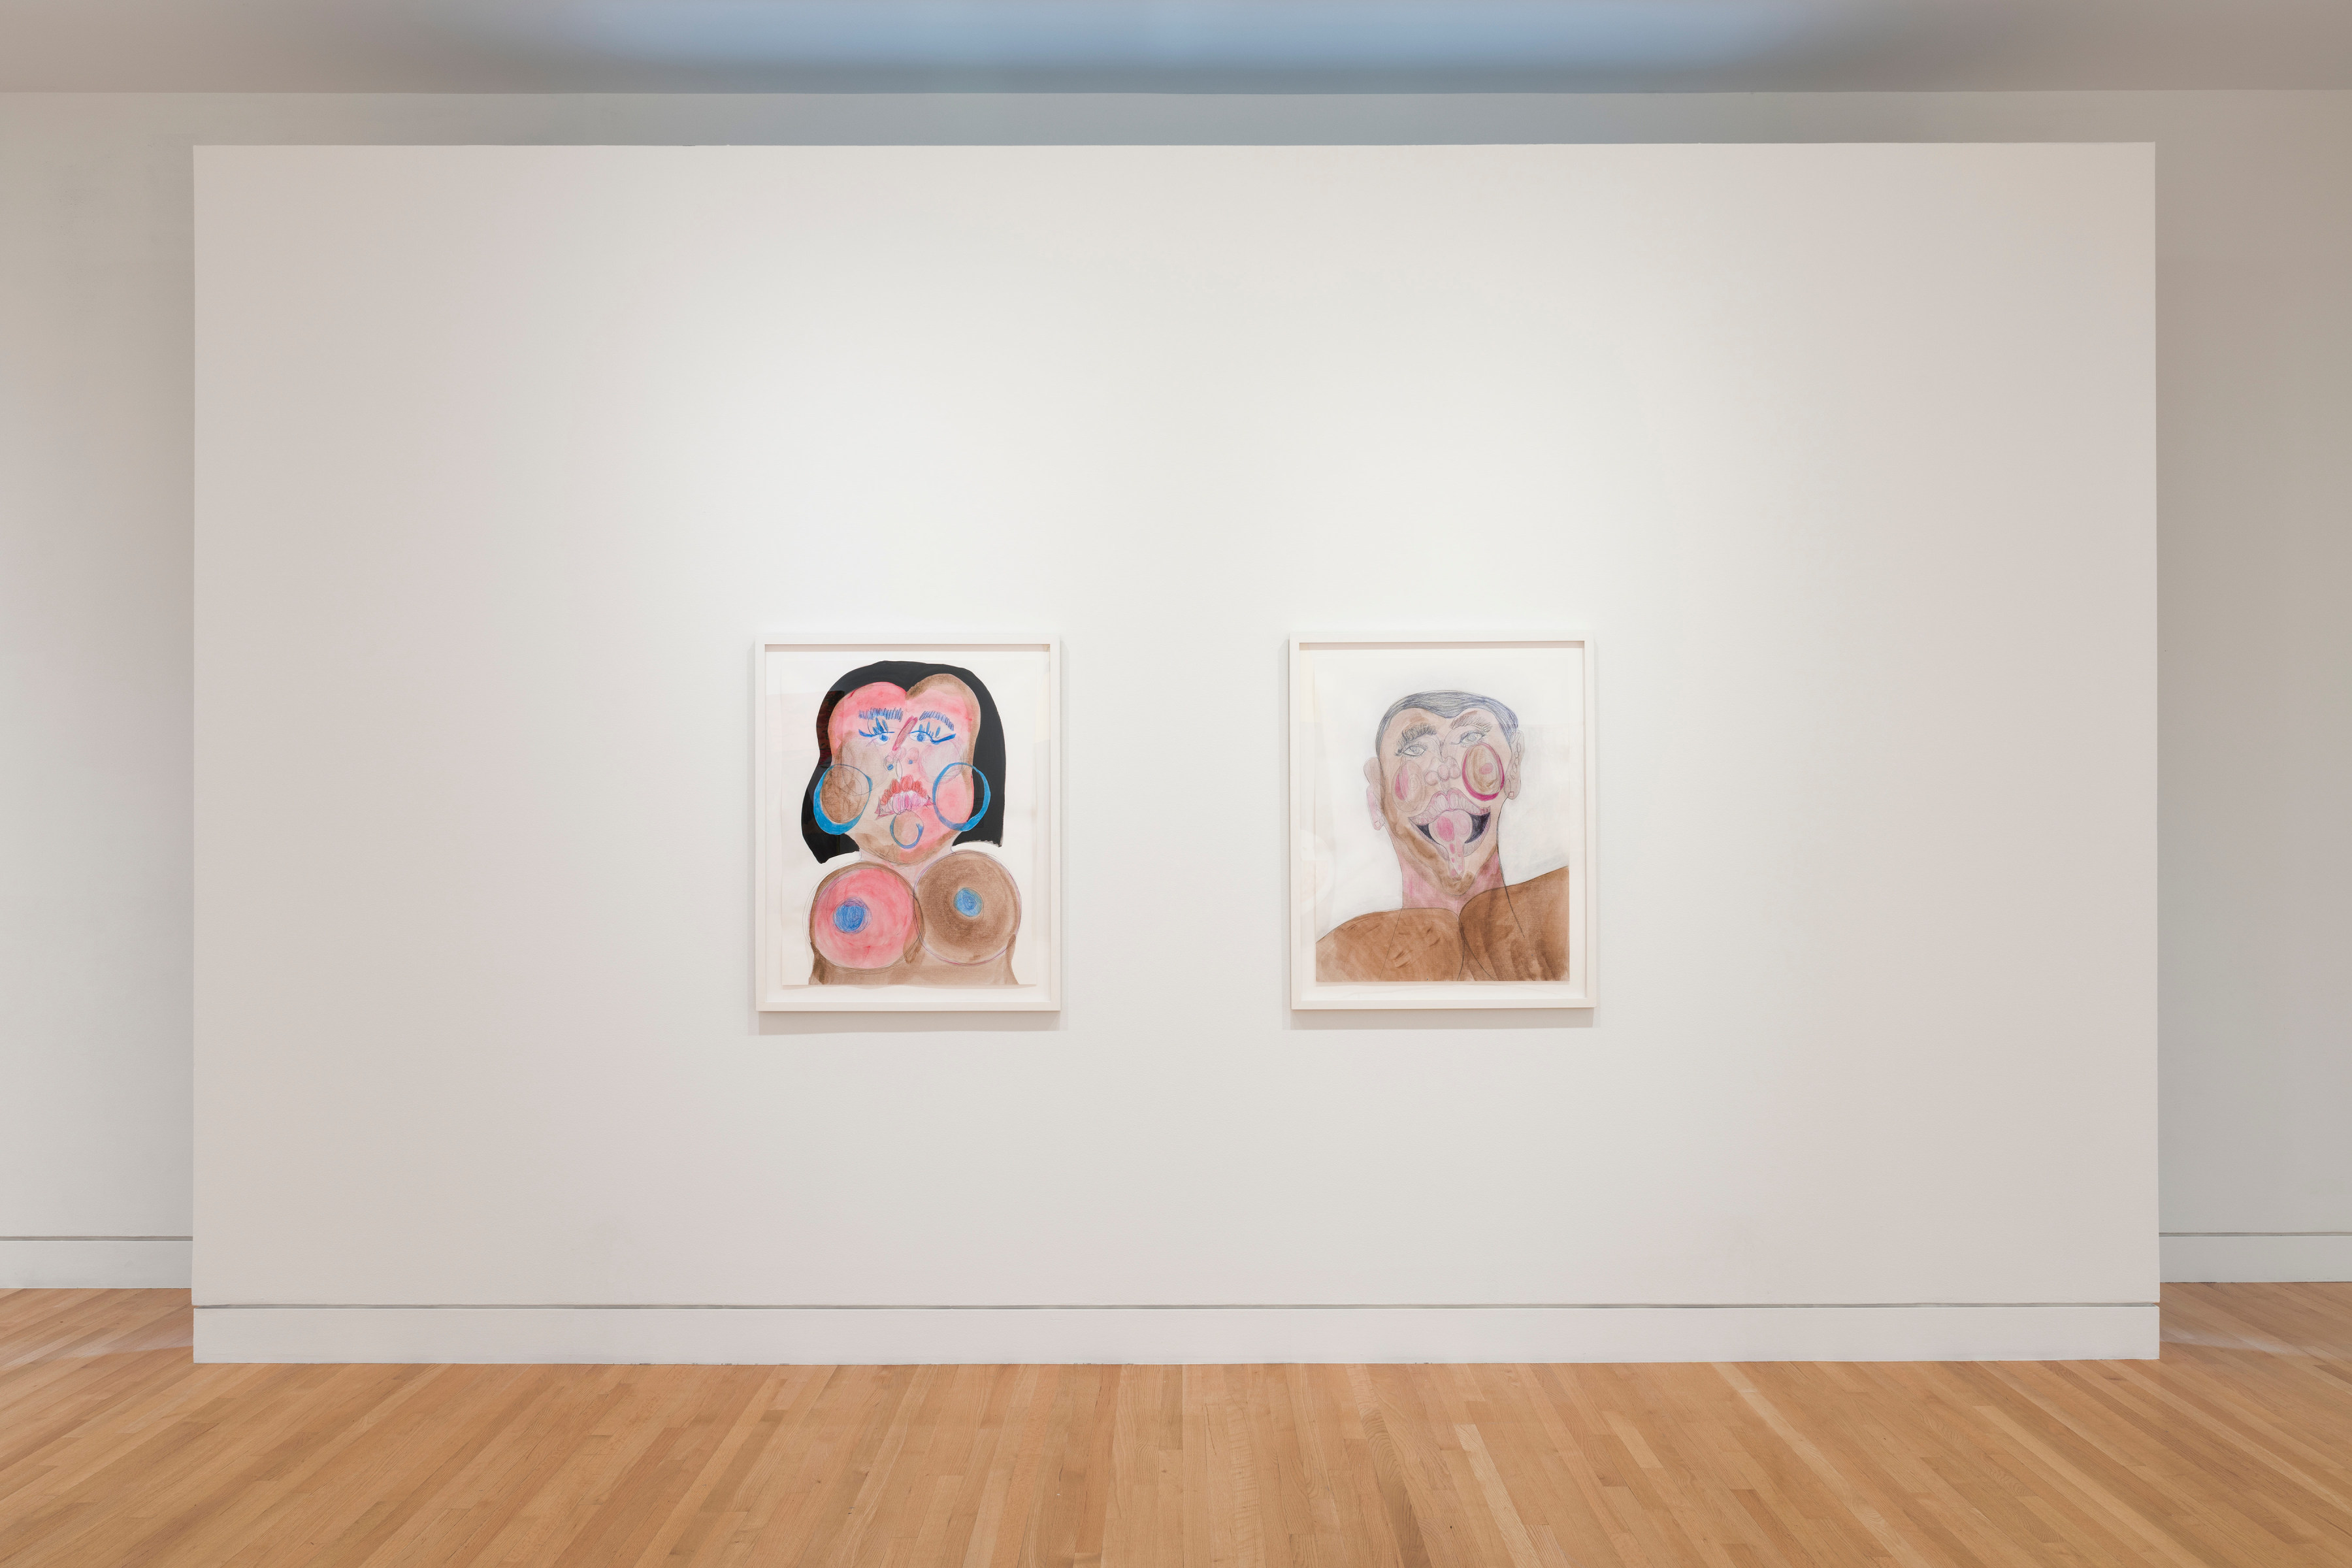 Installation view, A Living Legacy: Recent Acquisition in Contemporary Art, Frye Art Museum, Seattle, Washington, 2023